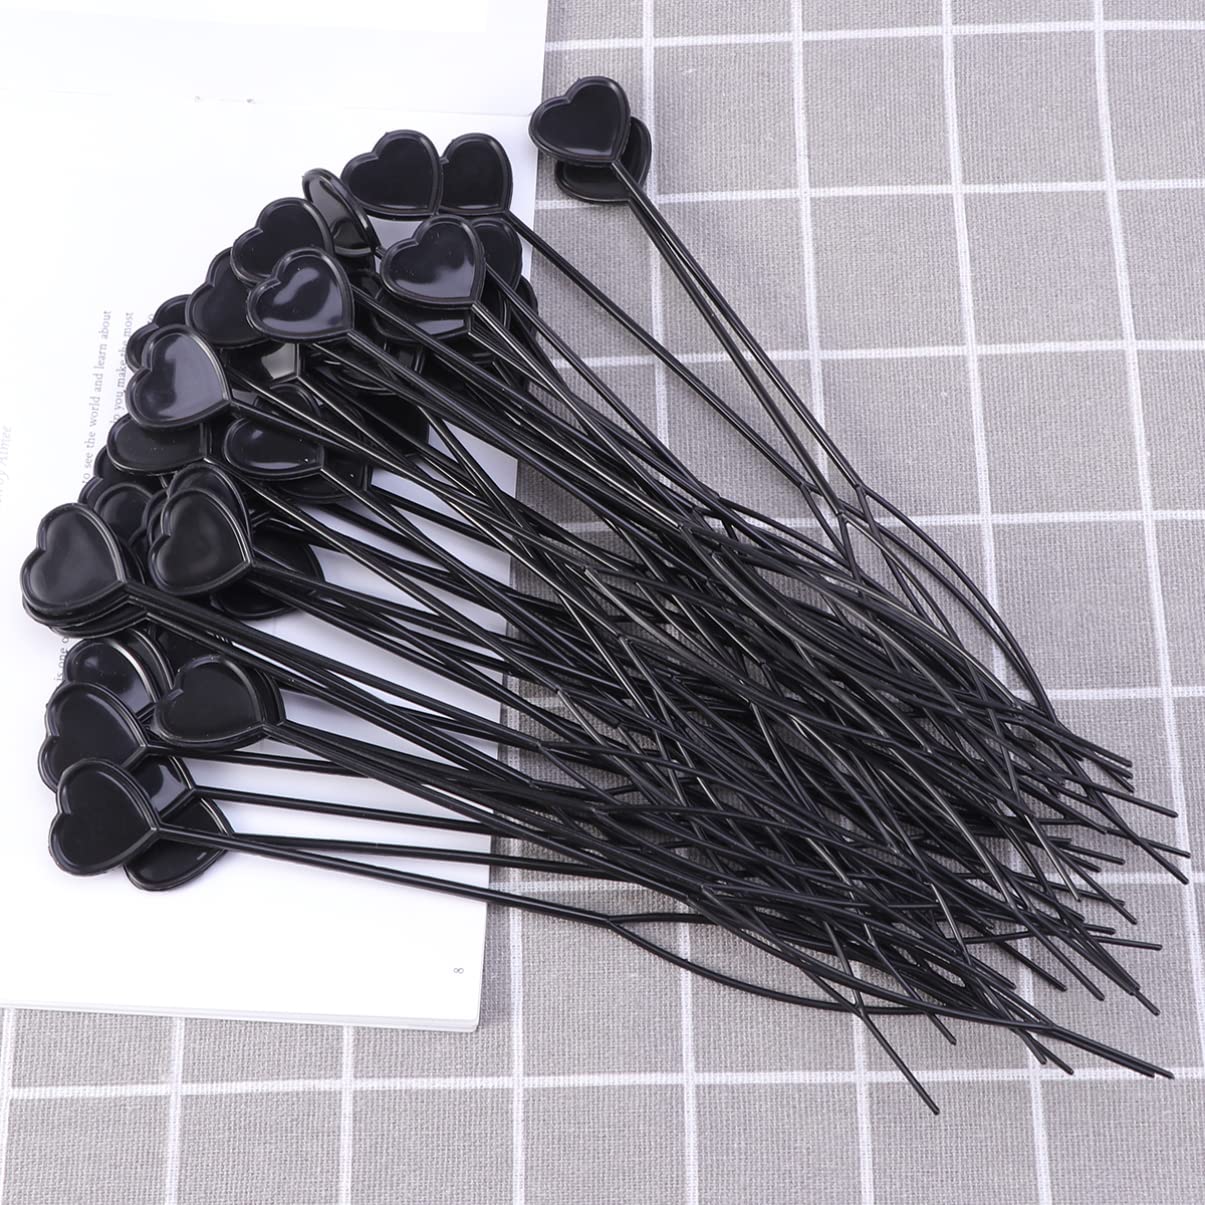 Bead Threader 50 Pcs Quick Beader Automatic Hair Beader Plastic Topsy Tail  Hair Braid Ponytail Styling Maker for Loading Beads Black Topsy Tail Hair